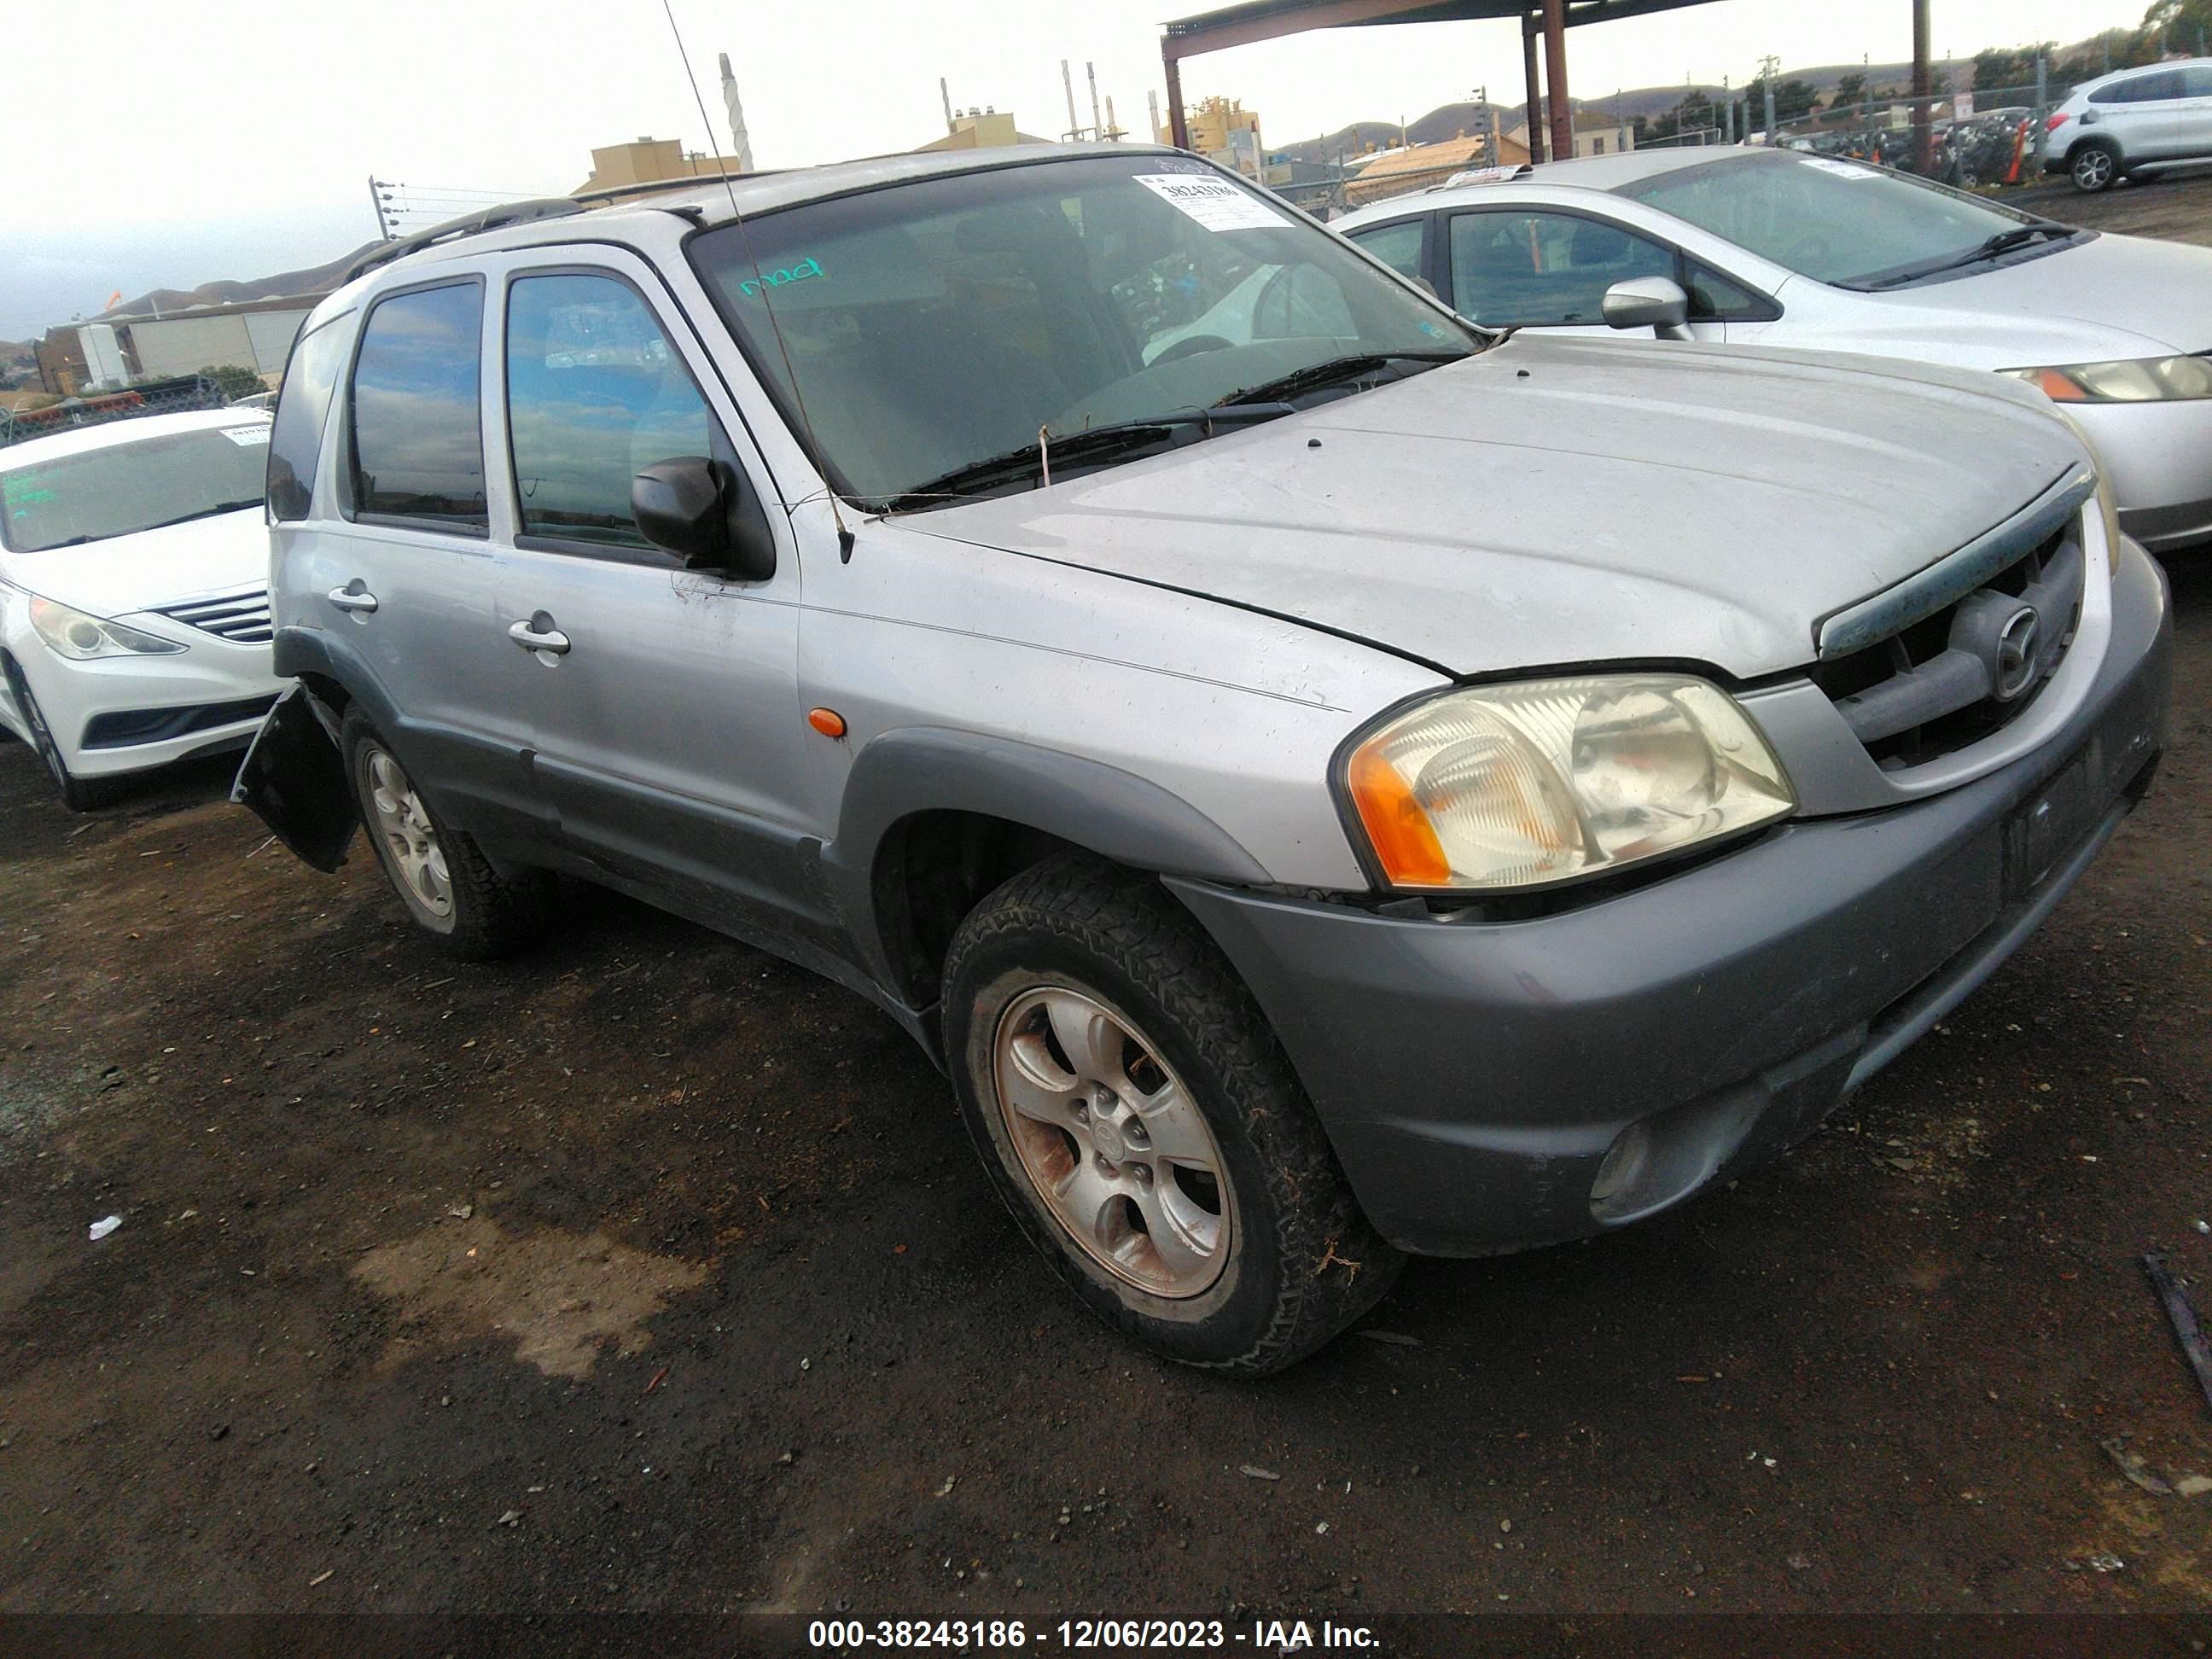 vin: 4F2YU091X1KM12807 4F2YU091X1KM12807 2001 mazda tribute 3000 for Sale in 94565, 2780 Willow Pass Road, Bay Point, USA